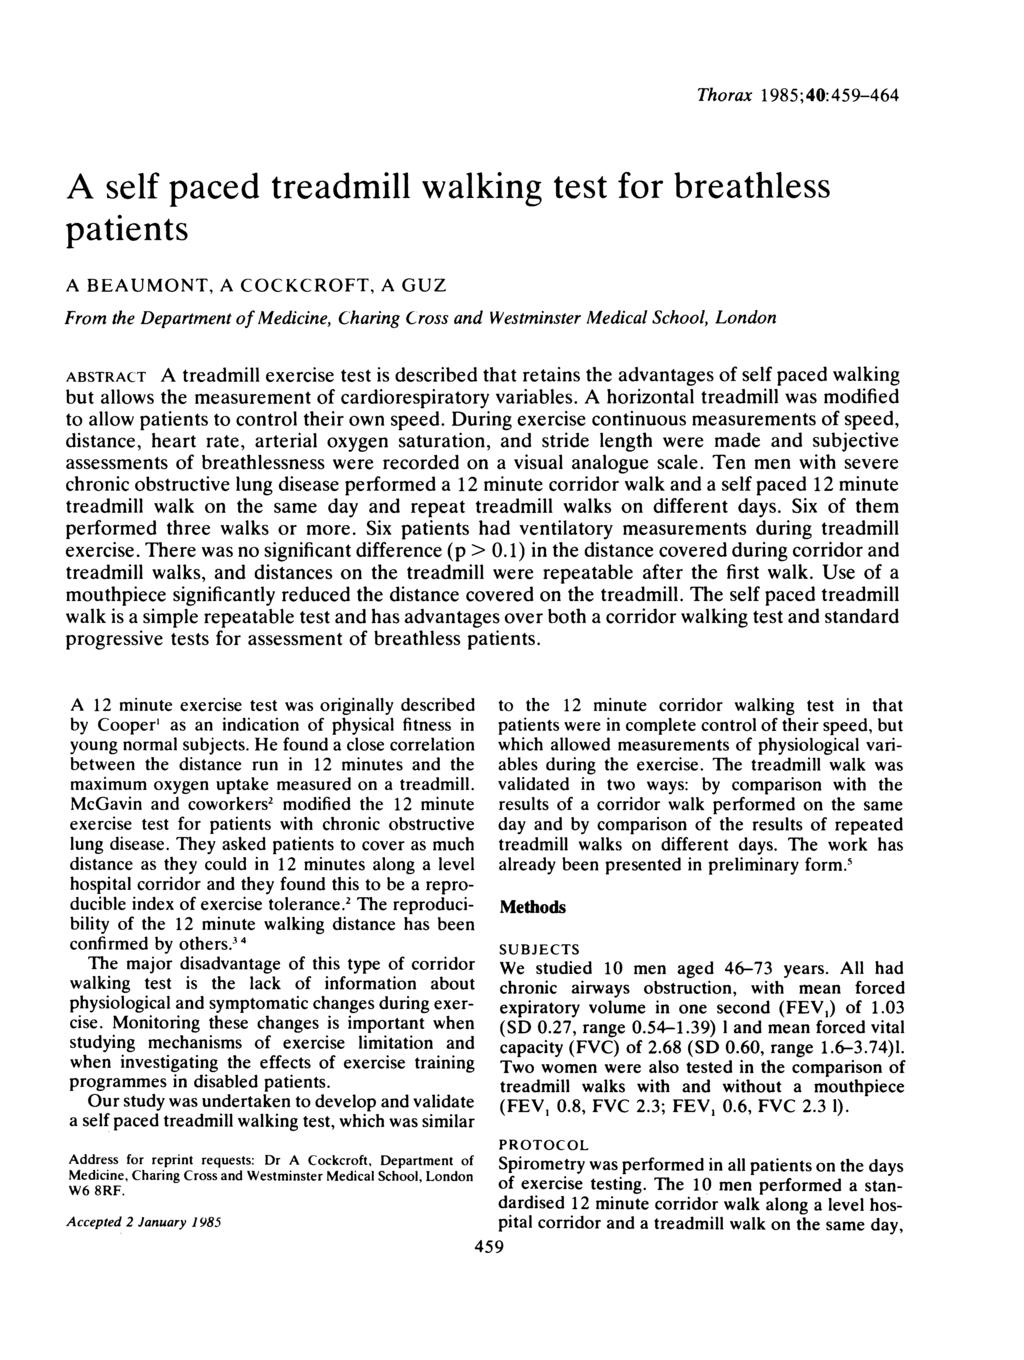 Thorax 1985;4:459-464 A self paced treadmill walking test for breathless patients A BEAUMONT, A COCKCROFT, A GUZ From the Department of Medicine, Charing Cross and Westminster Medical School, London